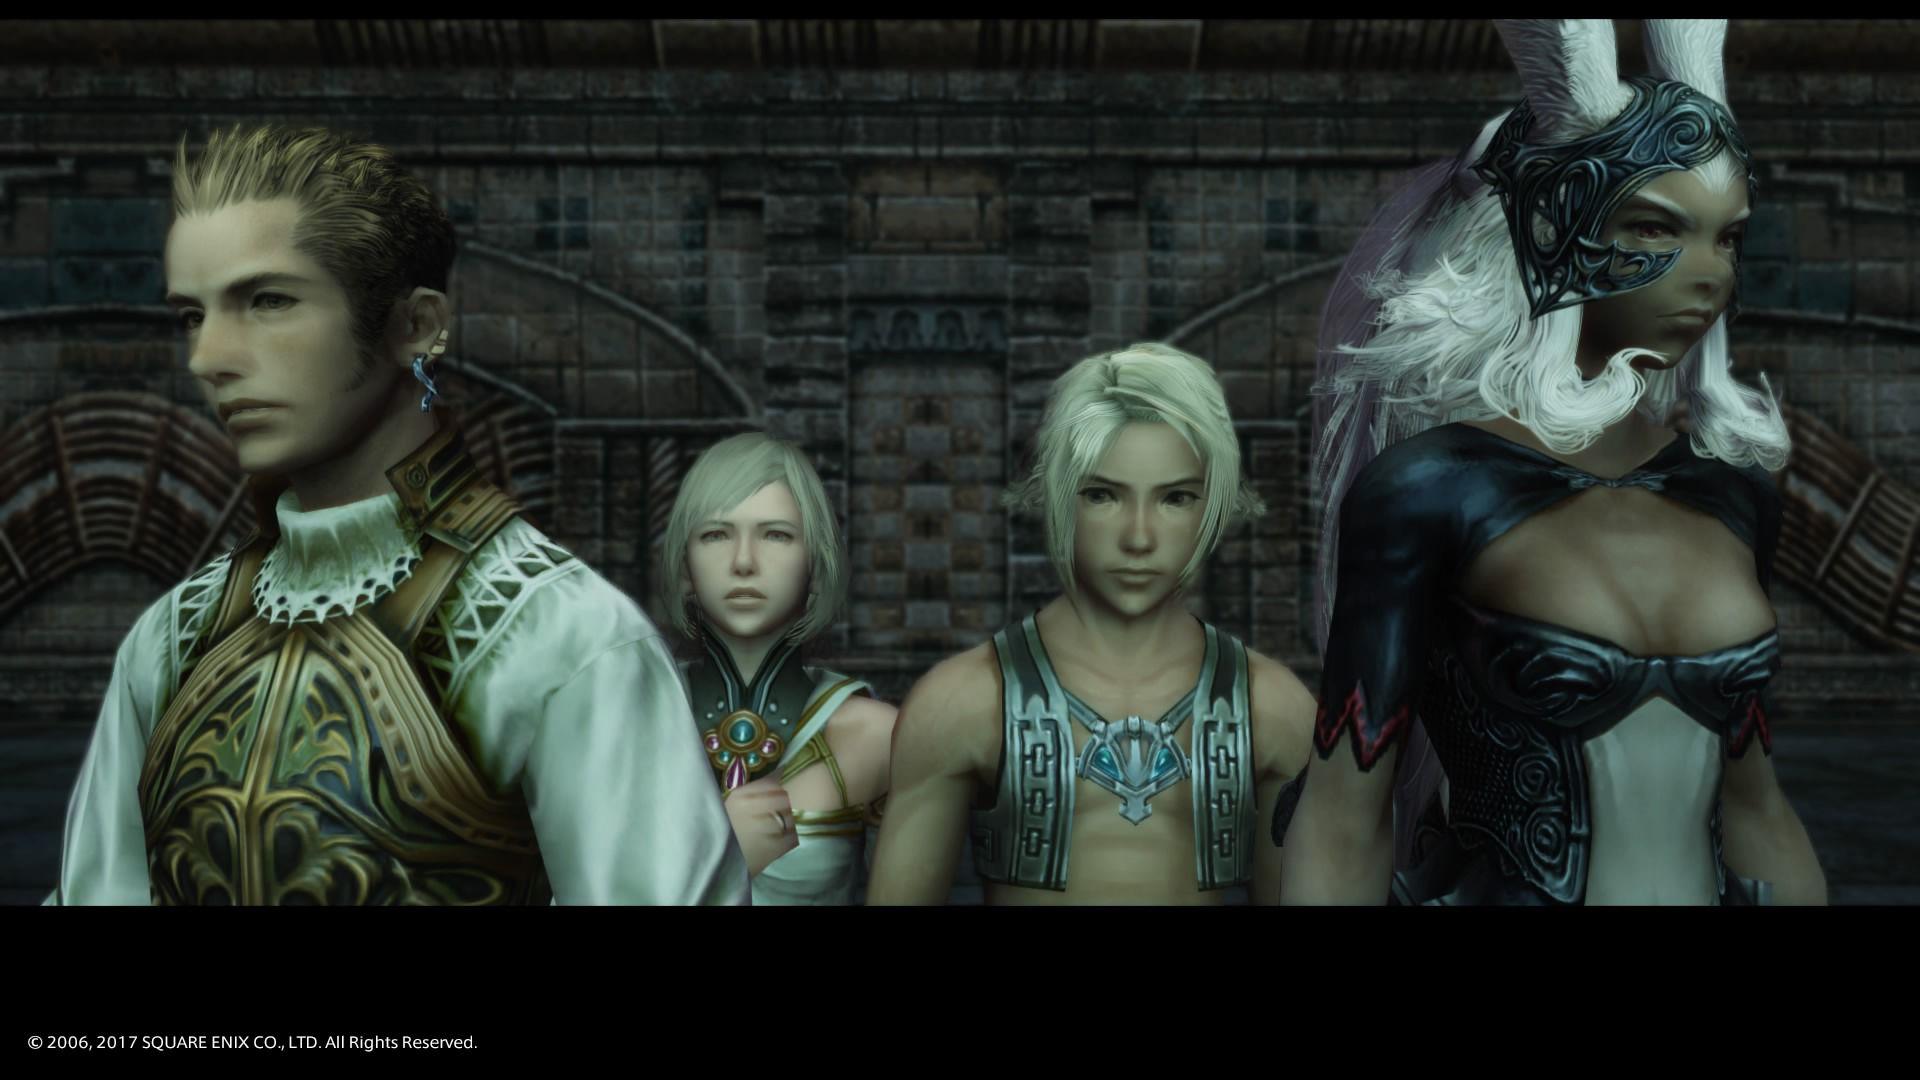 Final Fantasy XII The Zodiac Age: Revisiting a Black Sheep With a